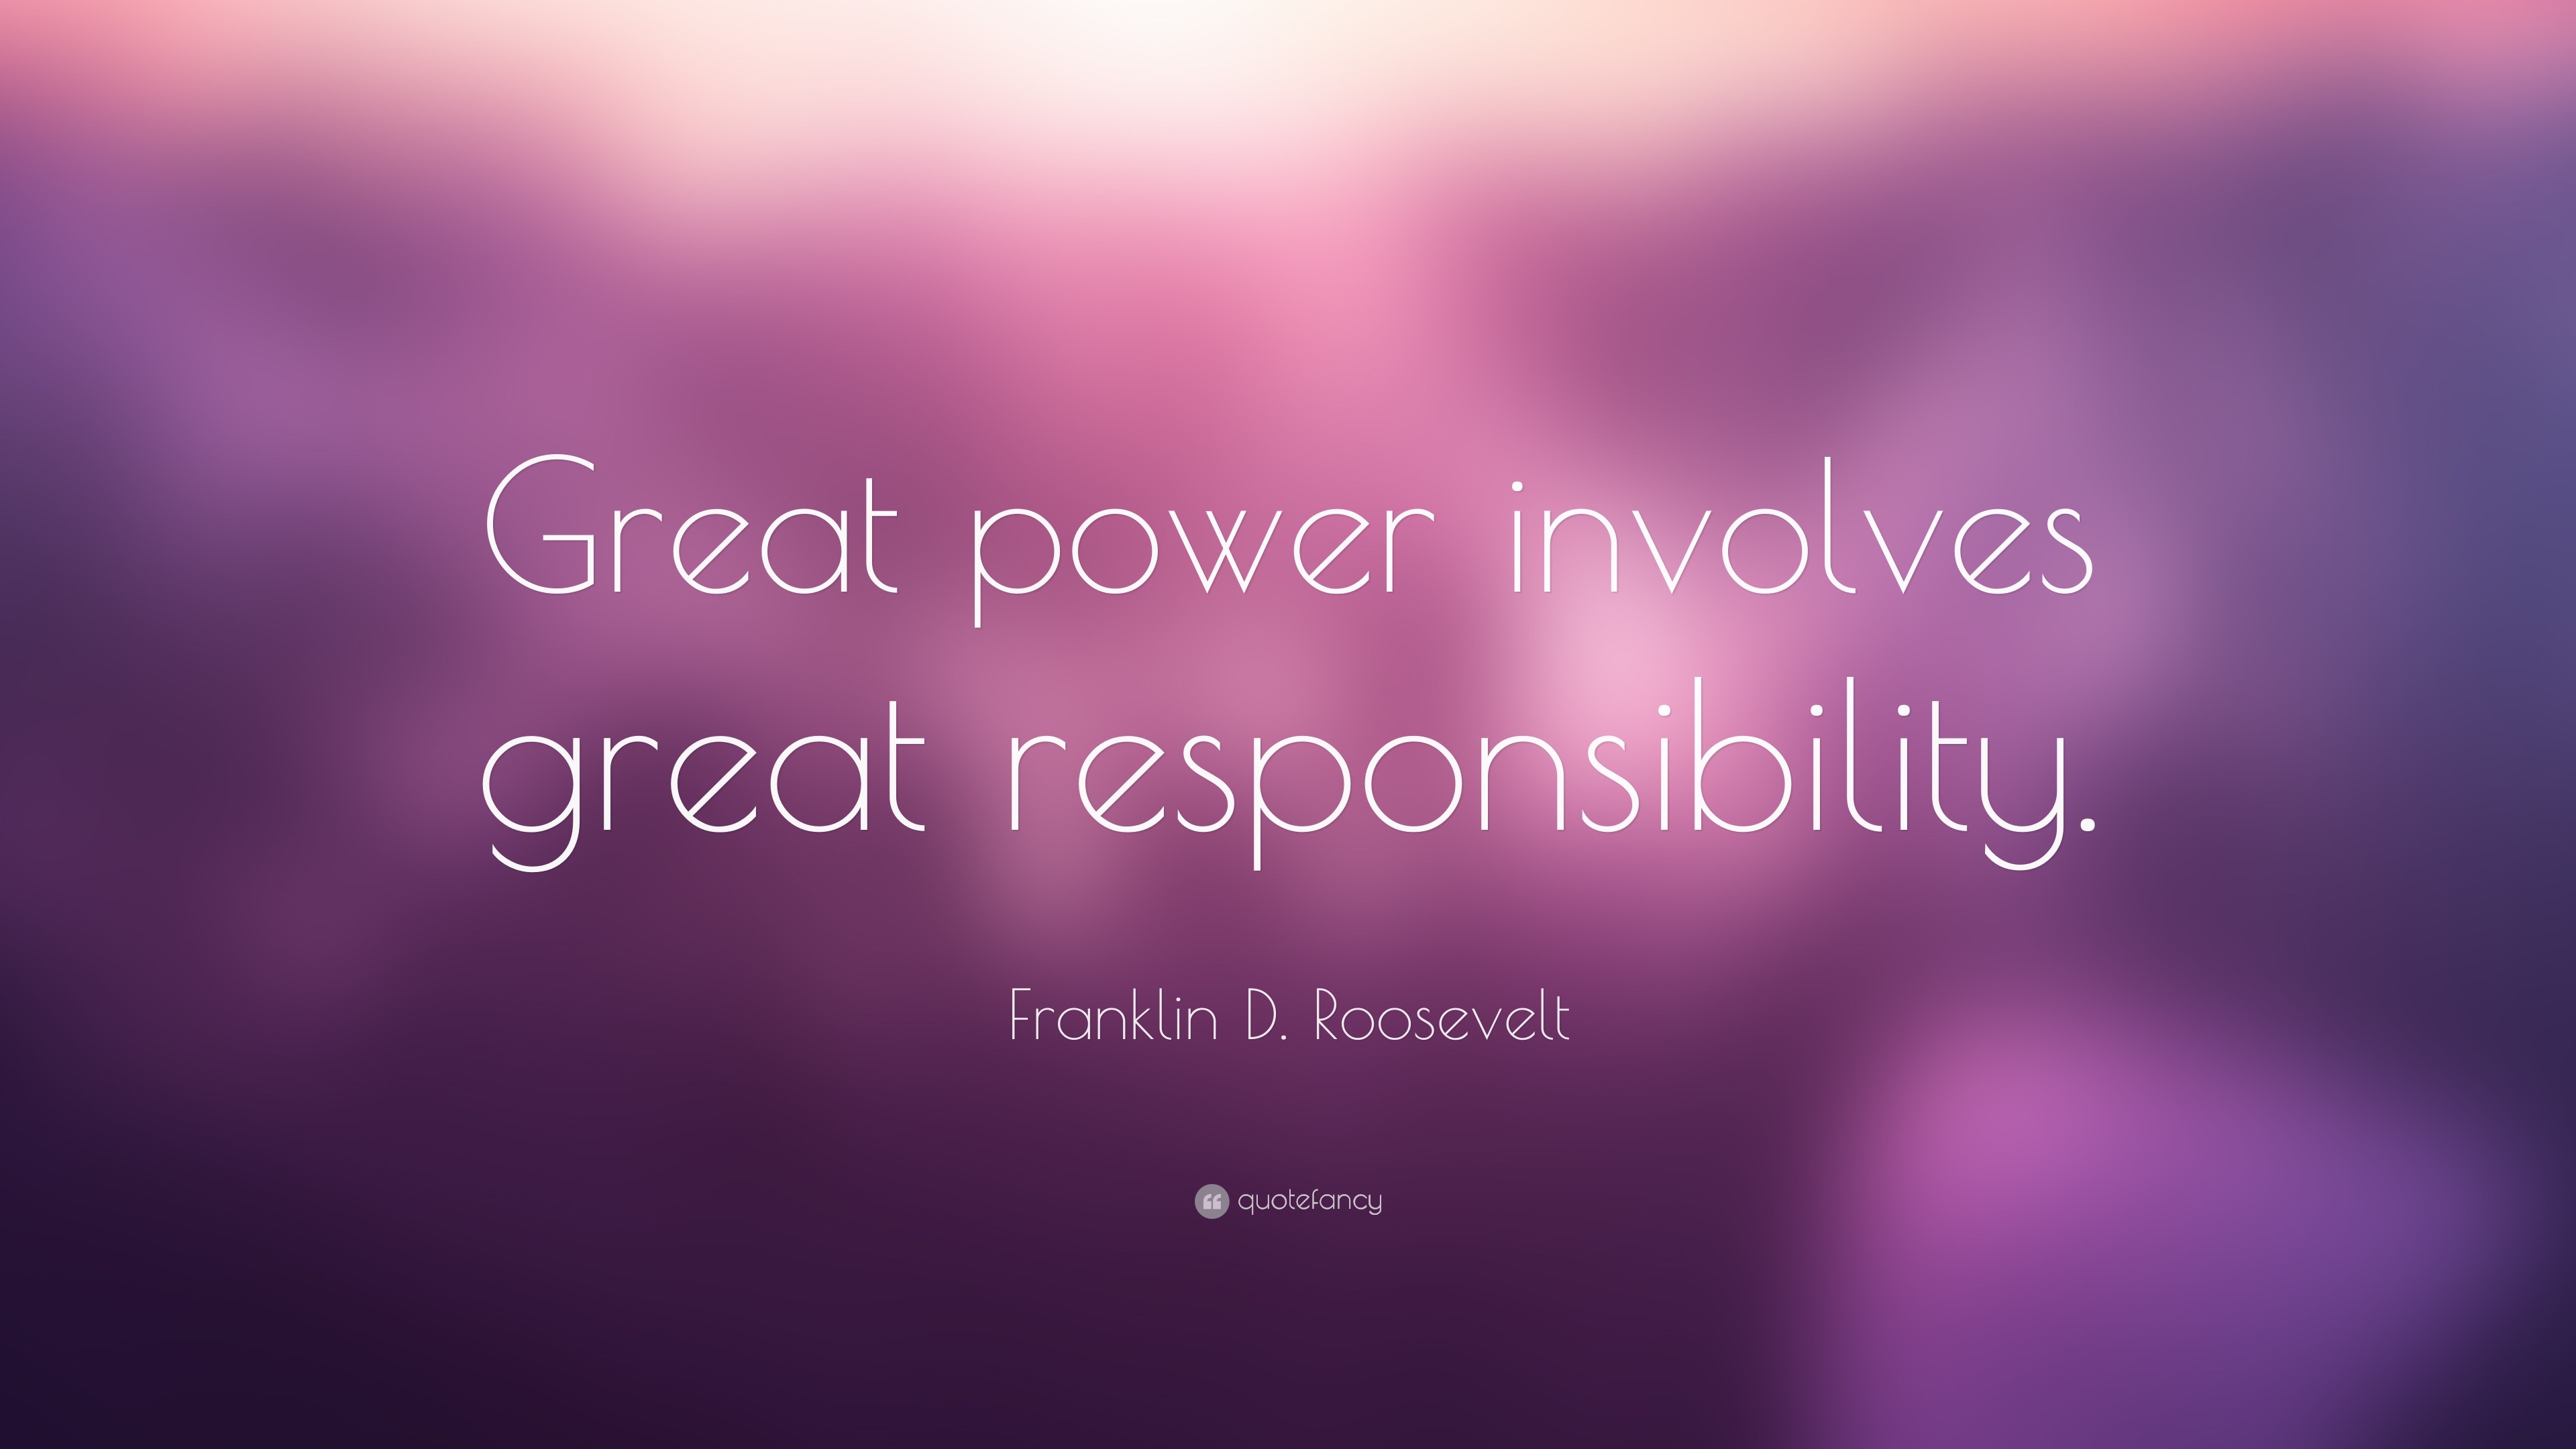 Franklin D. Roosevelt Quote: “Great power involves great responsibility